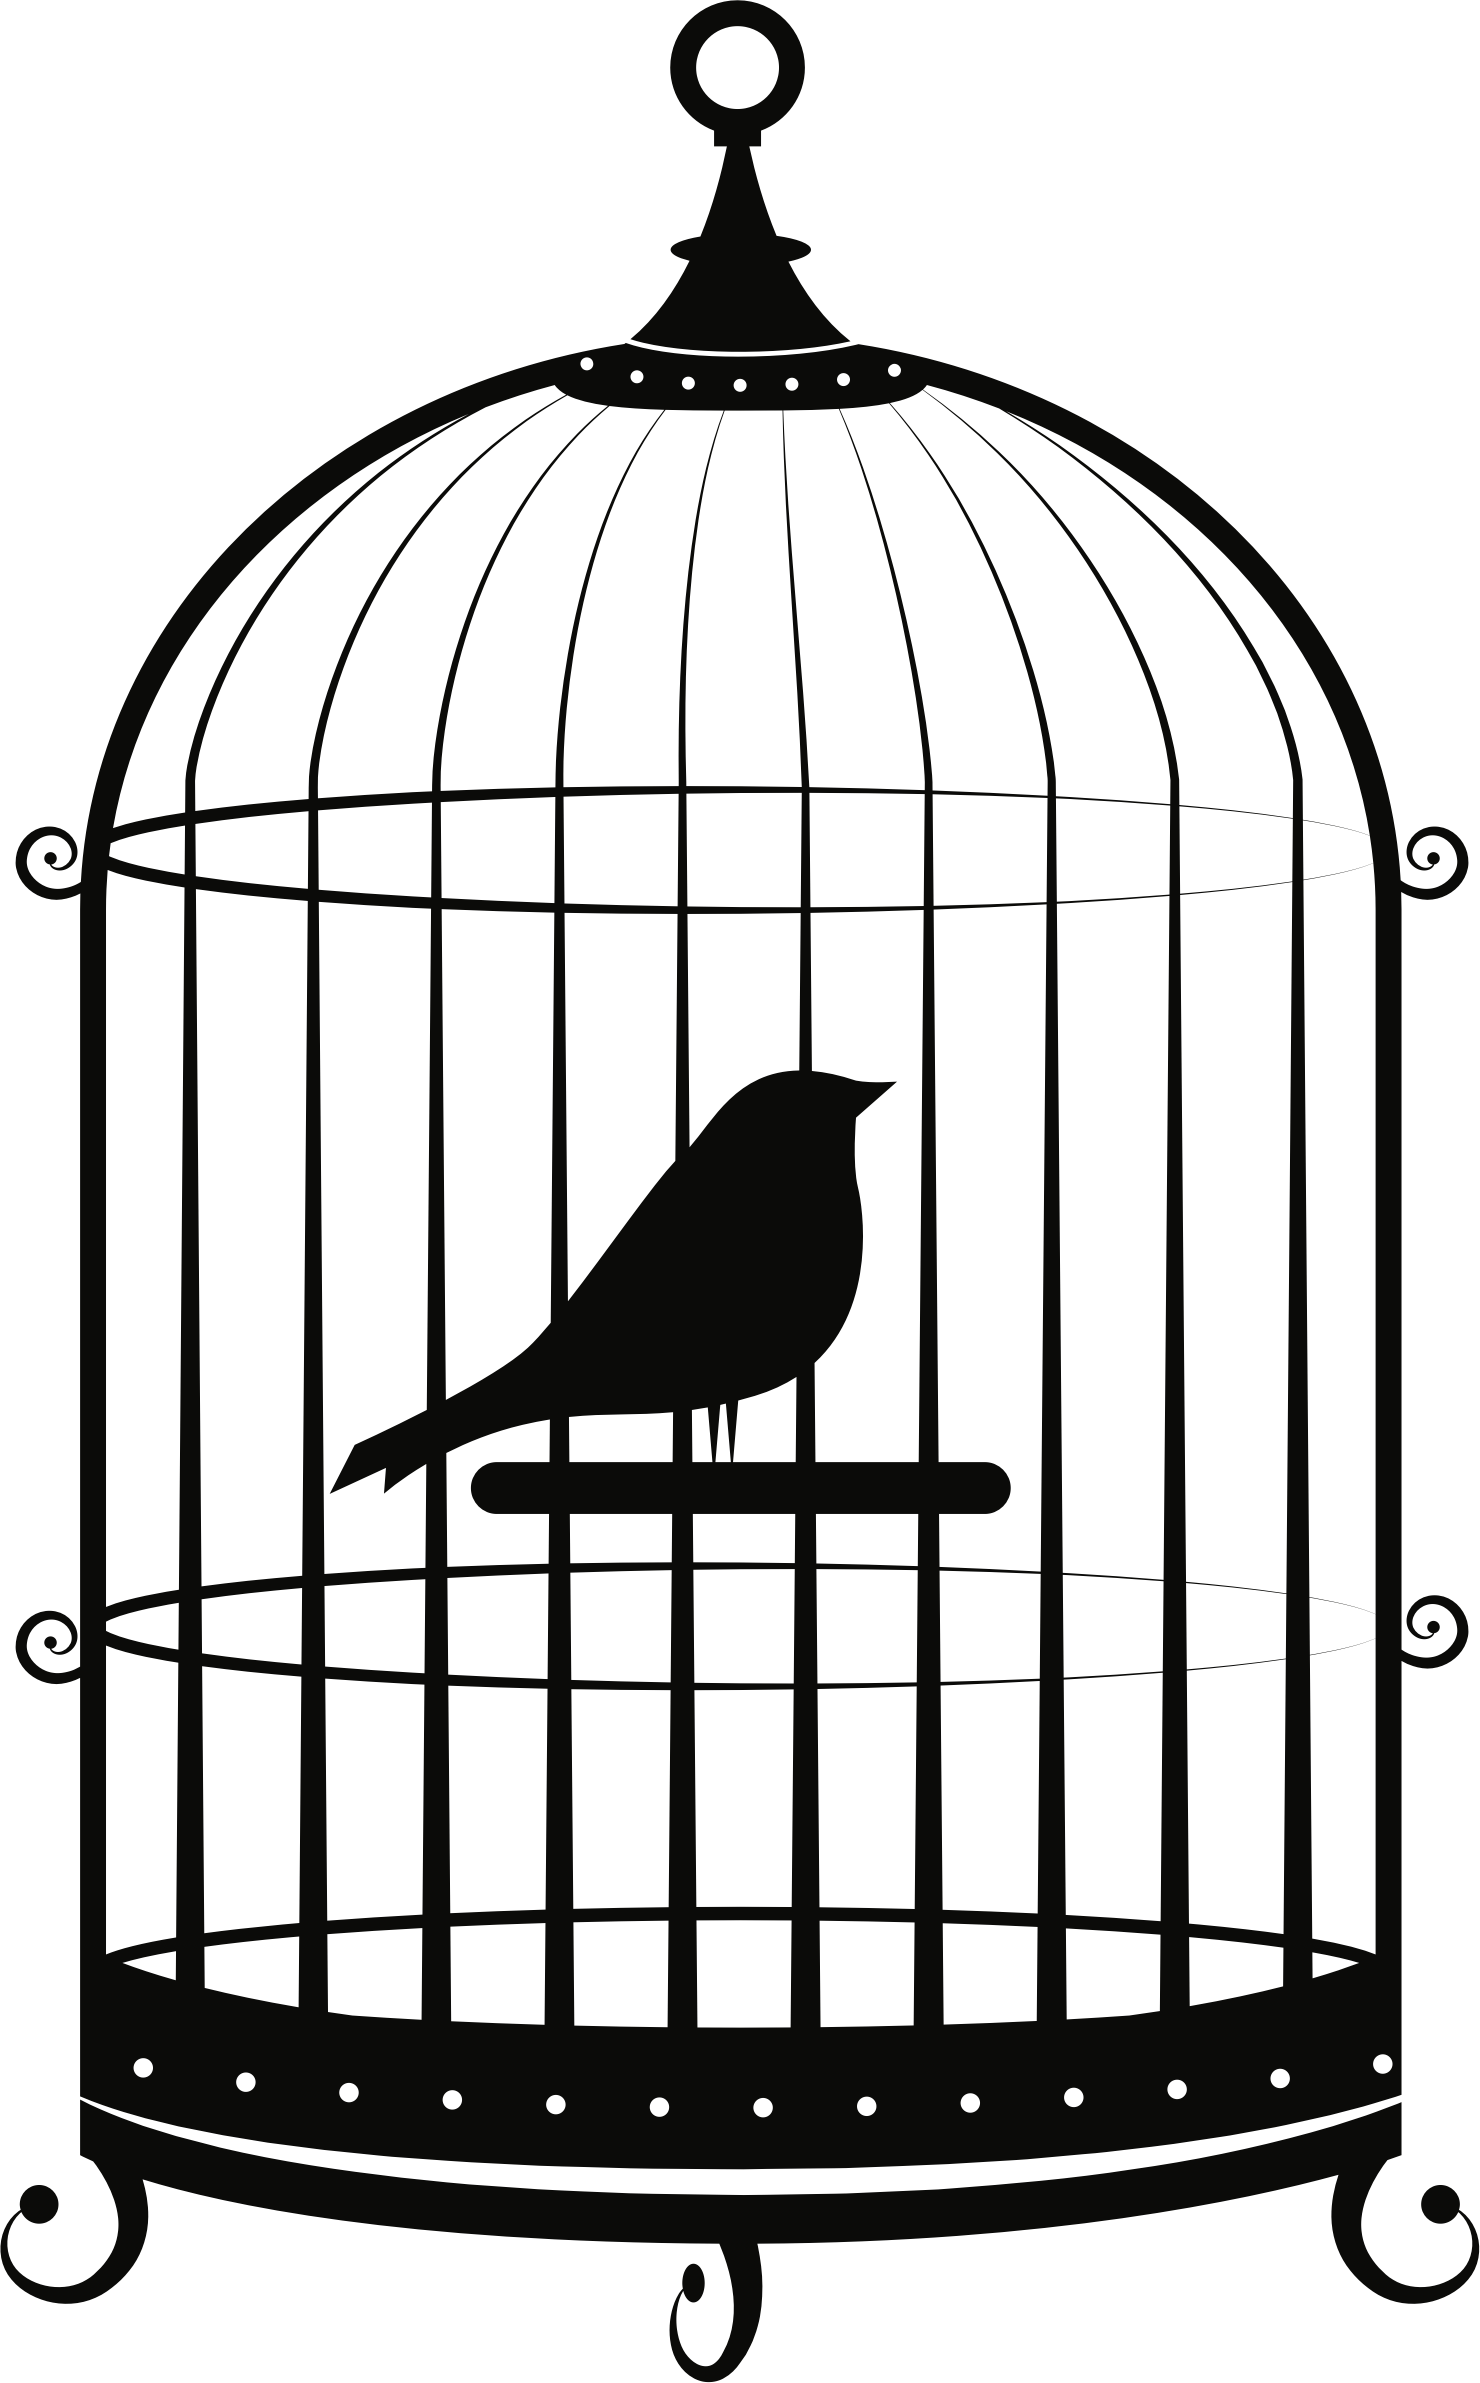 A Bird In A Cage